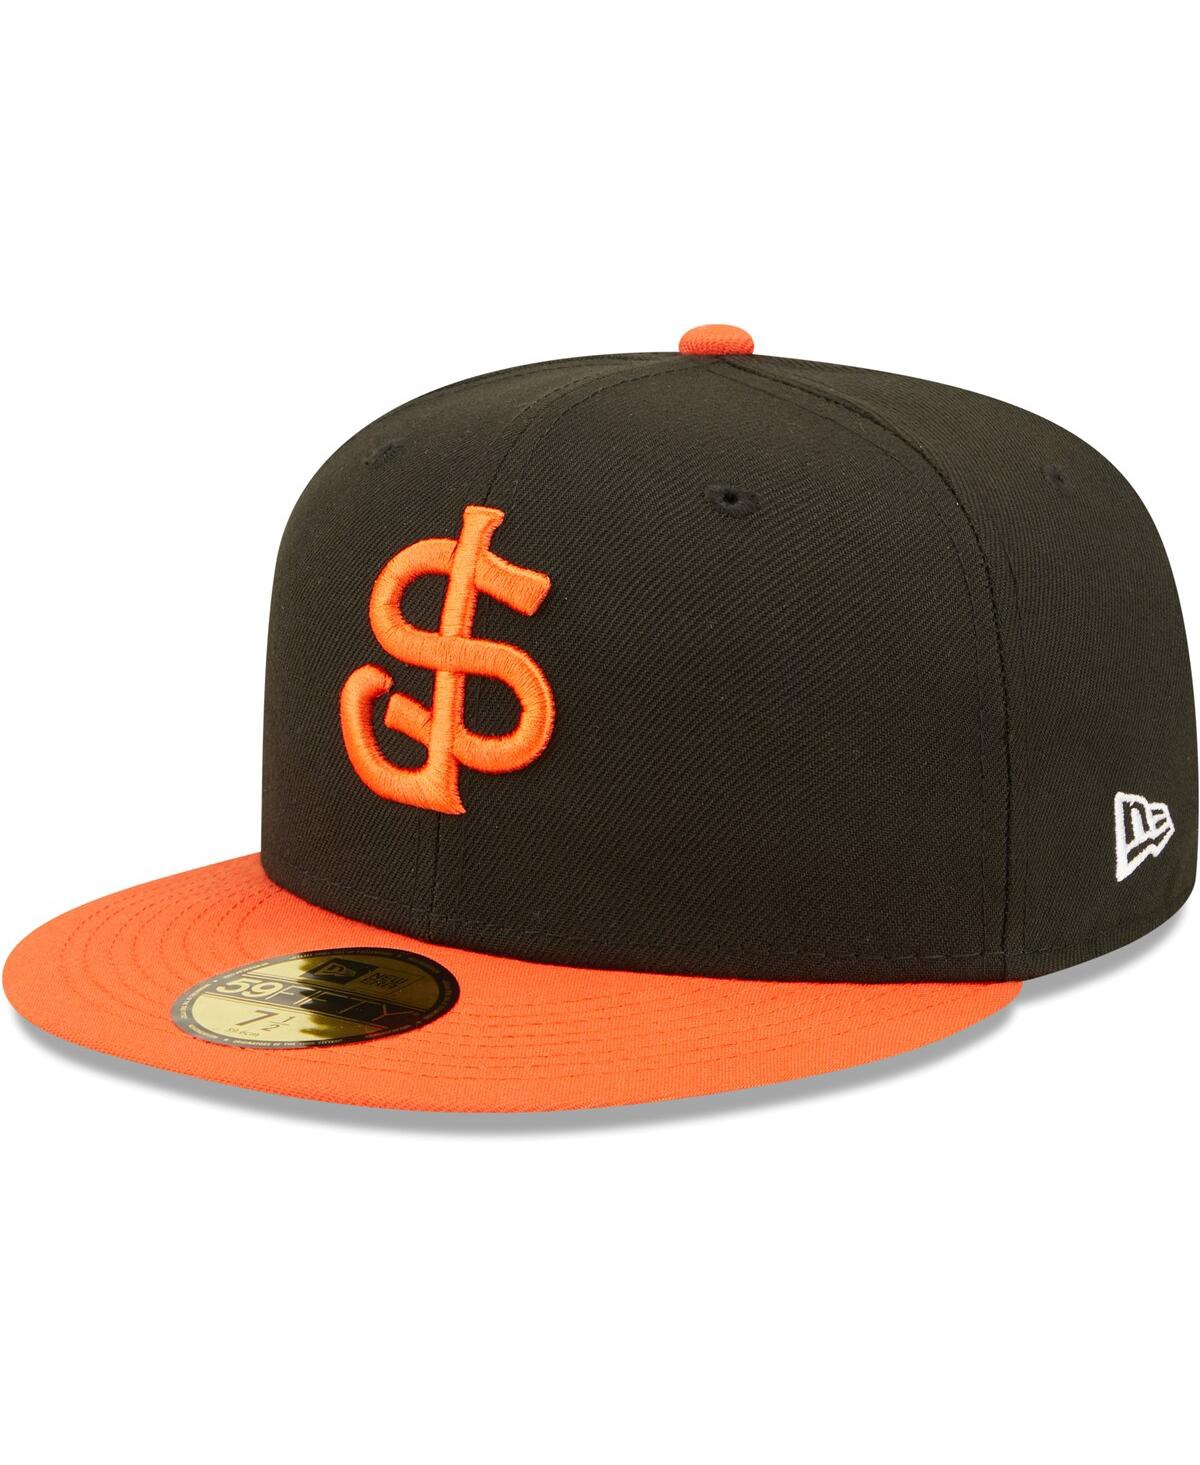 NEW ERA MEN'S NEW ERA BLACK SAN JOSE GIANTS AUTHENTIC COLLECTION TEAM HOME 59FIFTY FITTED HAT